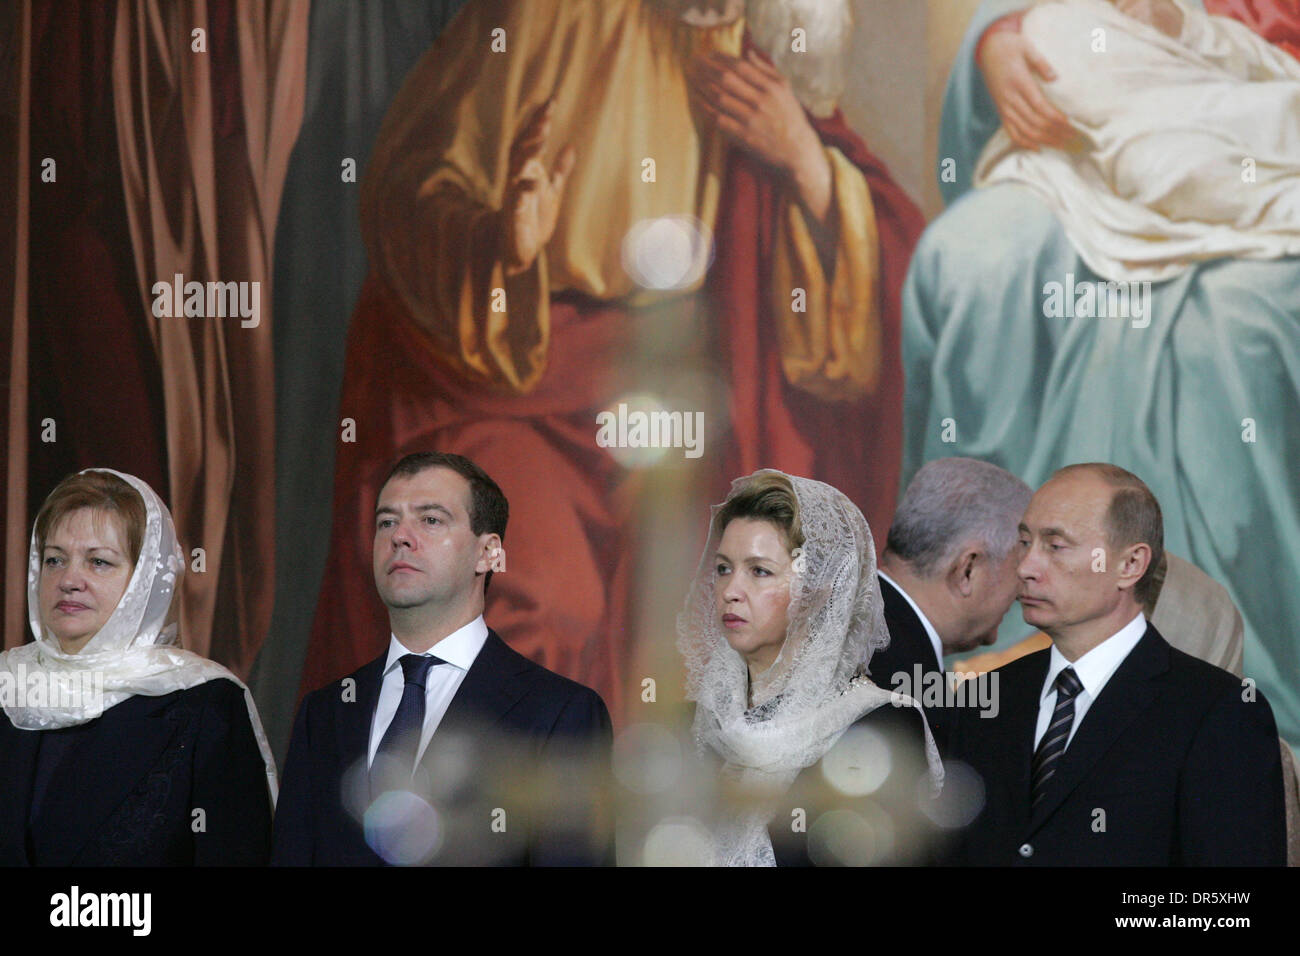 Feb 01, 2009 - Moscow, Russia - L-R Wife of Moldova President TAISIYA VORONINA, President DMITRY MEDVEDEV (C), his wife, SVETLANA MEDVEDEVA and Prime Minister VLADIMIR PUTIN (R) attend the enthronement ceremony of Patriarch Kirill of Moscow and All Russia, the 16th leader of the Russian Orthodox Church, at the Cathedral of Christ the Savior. (Credit Image: © PhotoXpress/ZUMA Press) Stock Photo